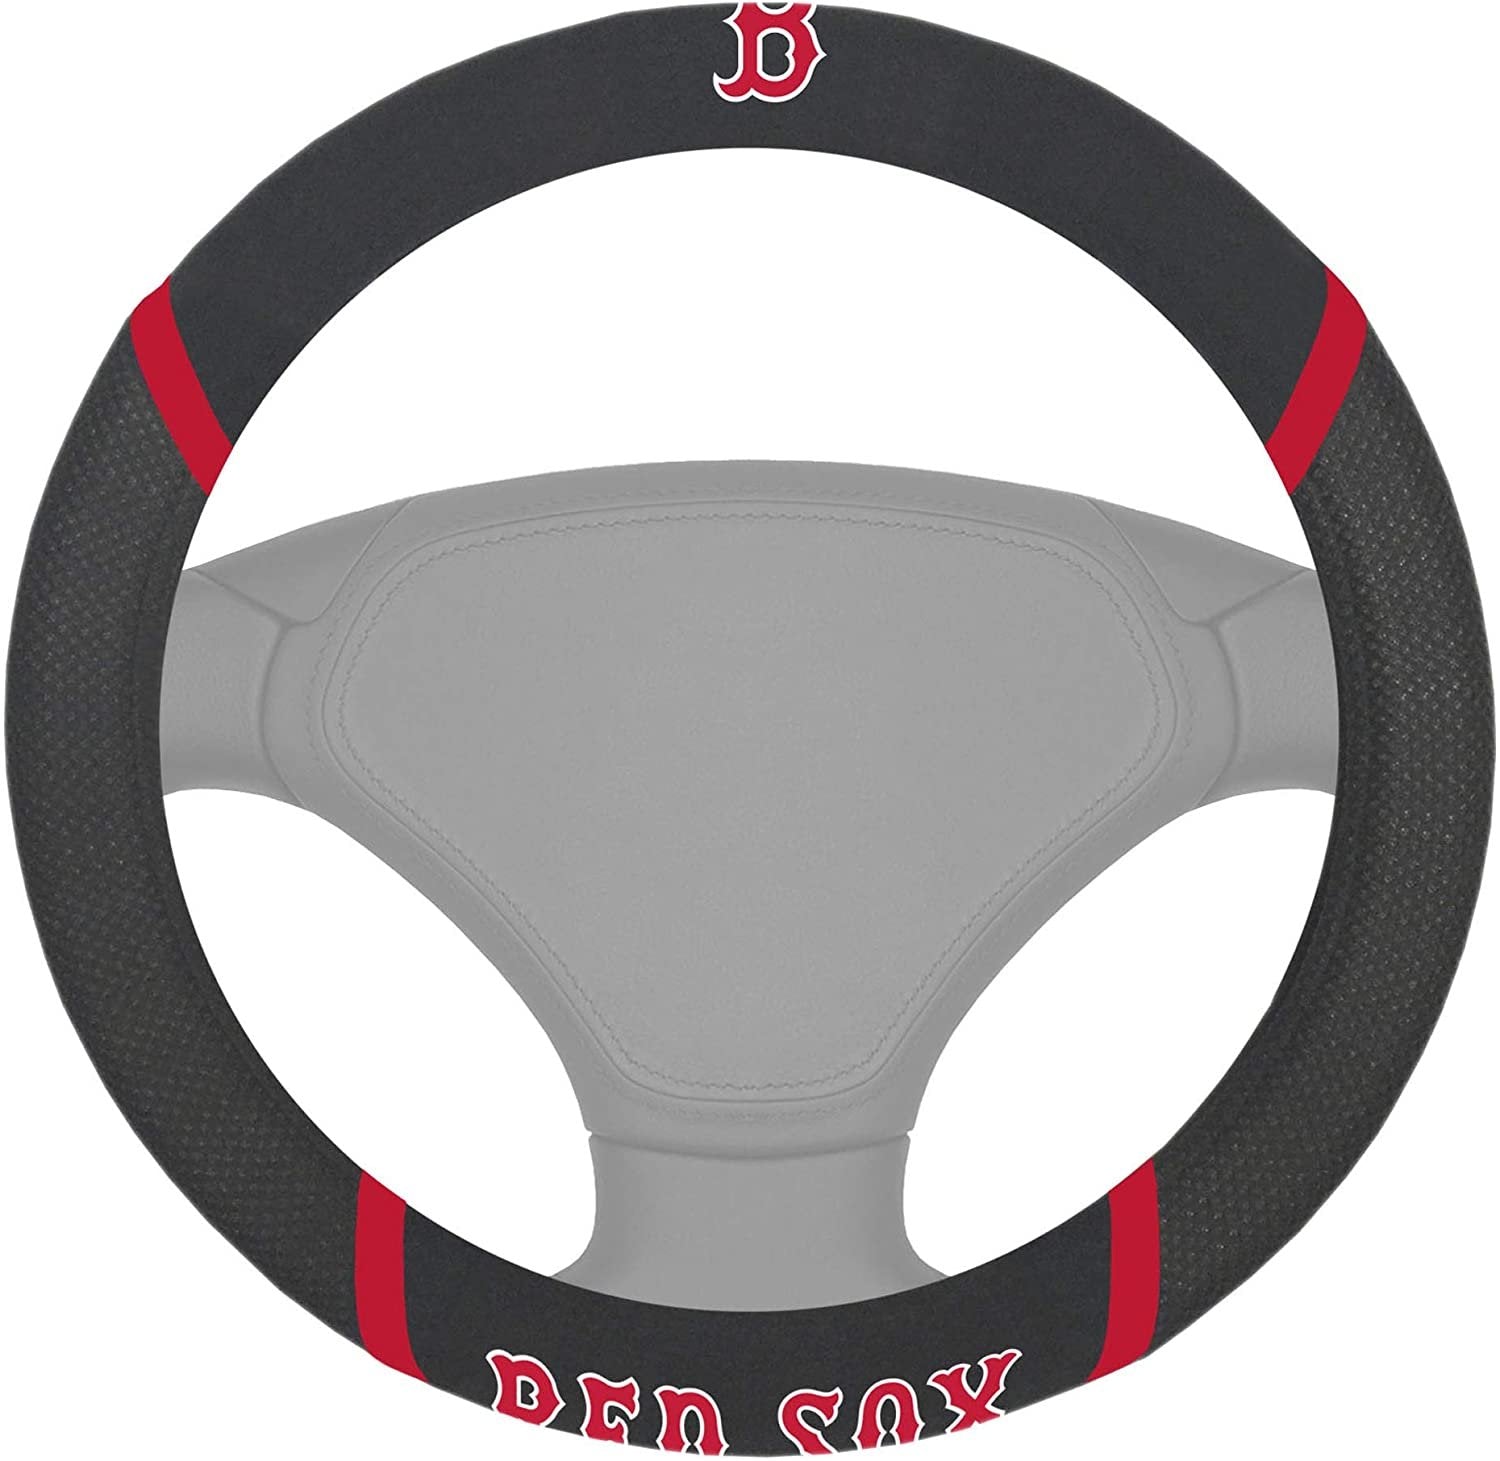 Boston Red Sox Steering Wheel Cover Premium Embroidered Black 15 Inch